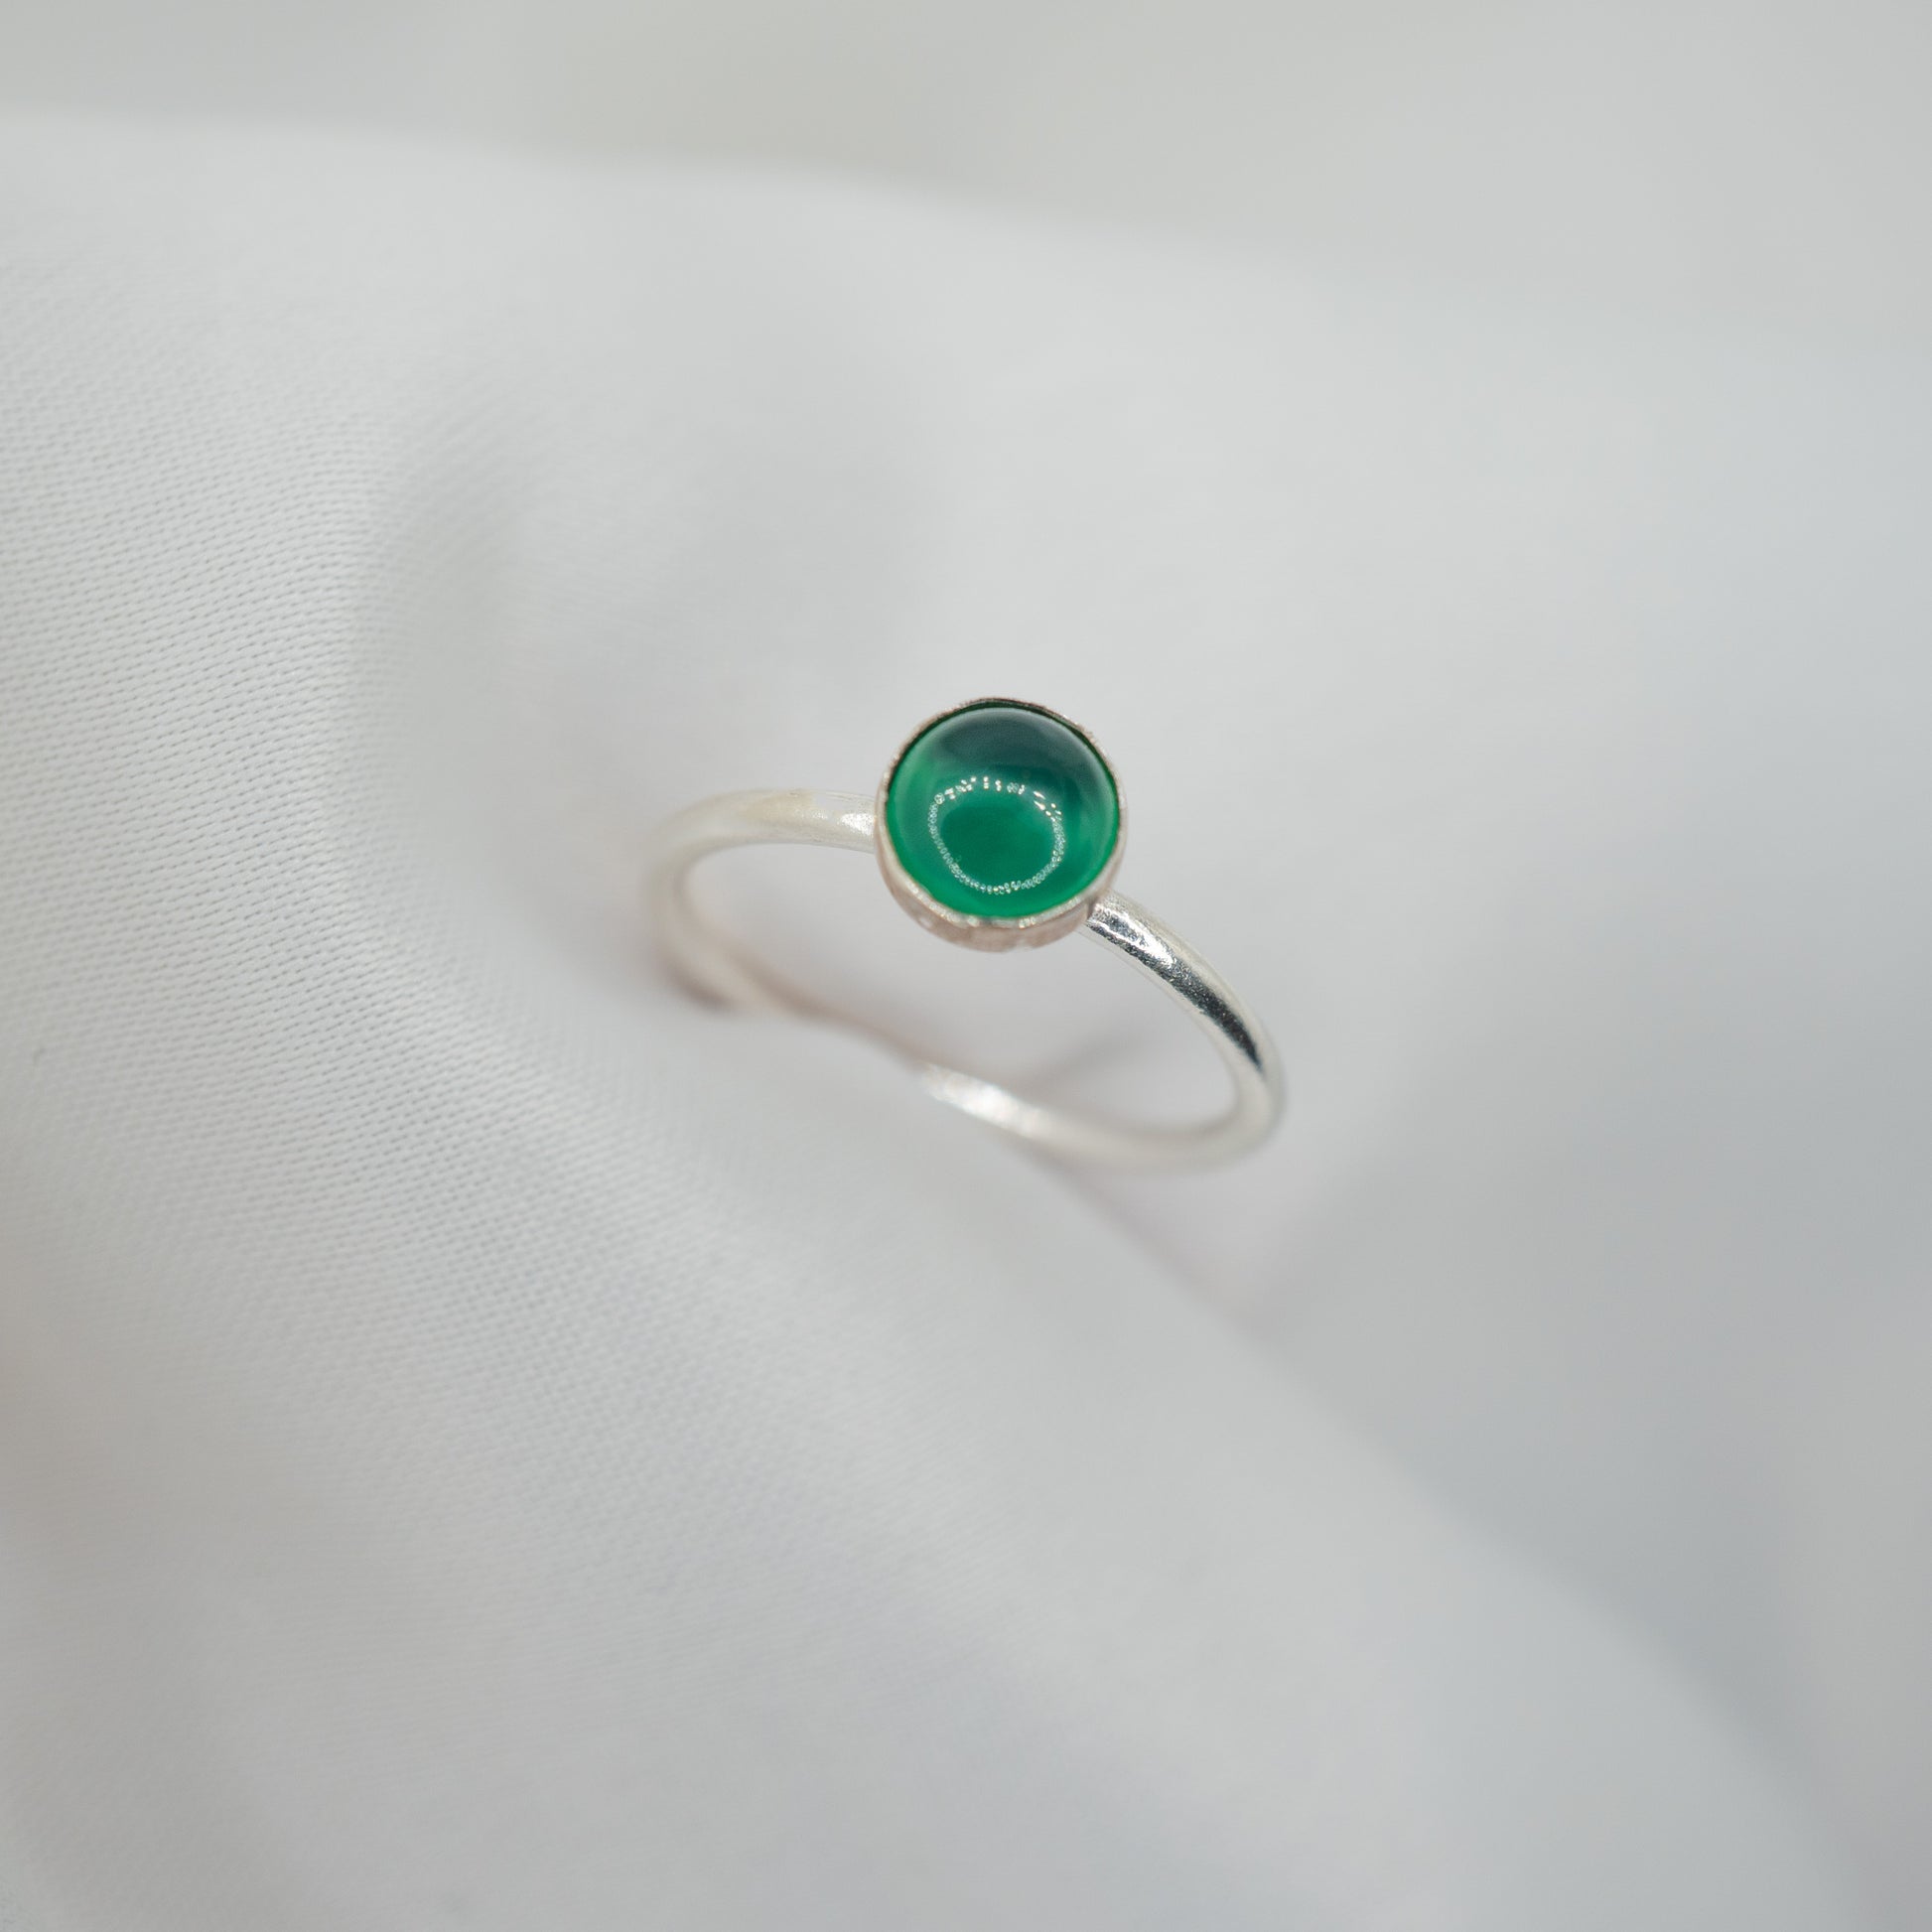 Sterling Silver Green Onyx Cabochon Ring - shot on white - upwards view